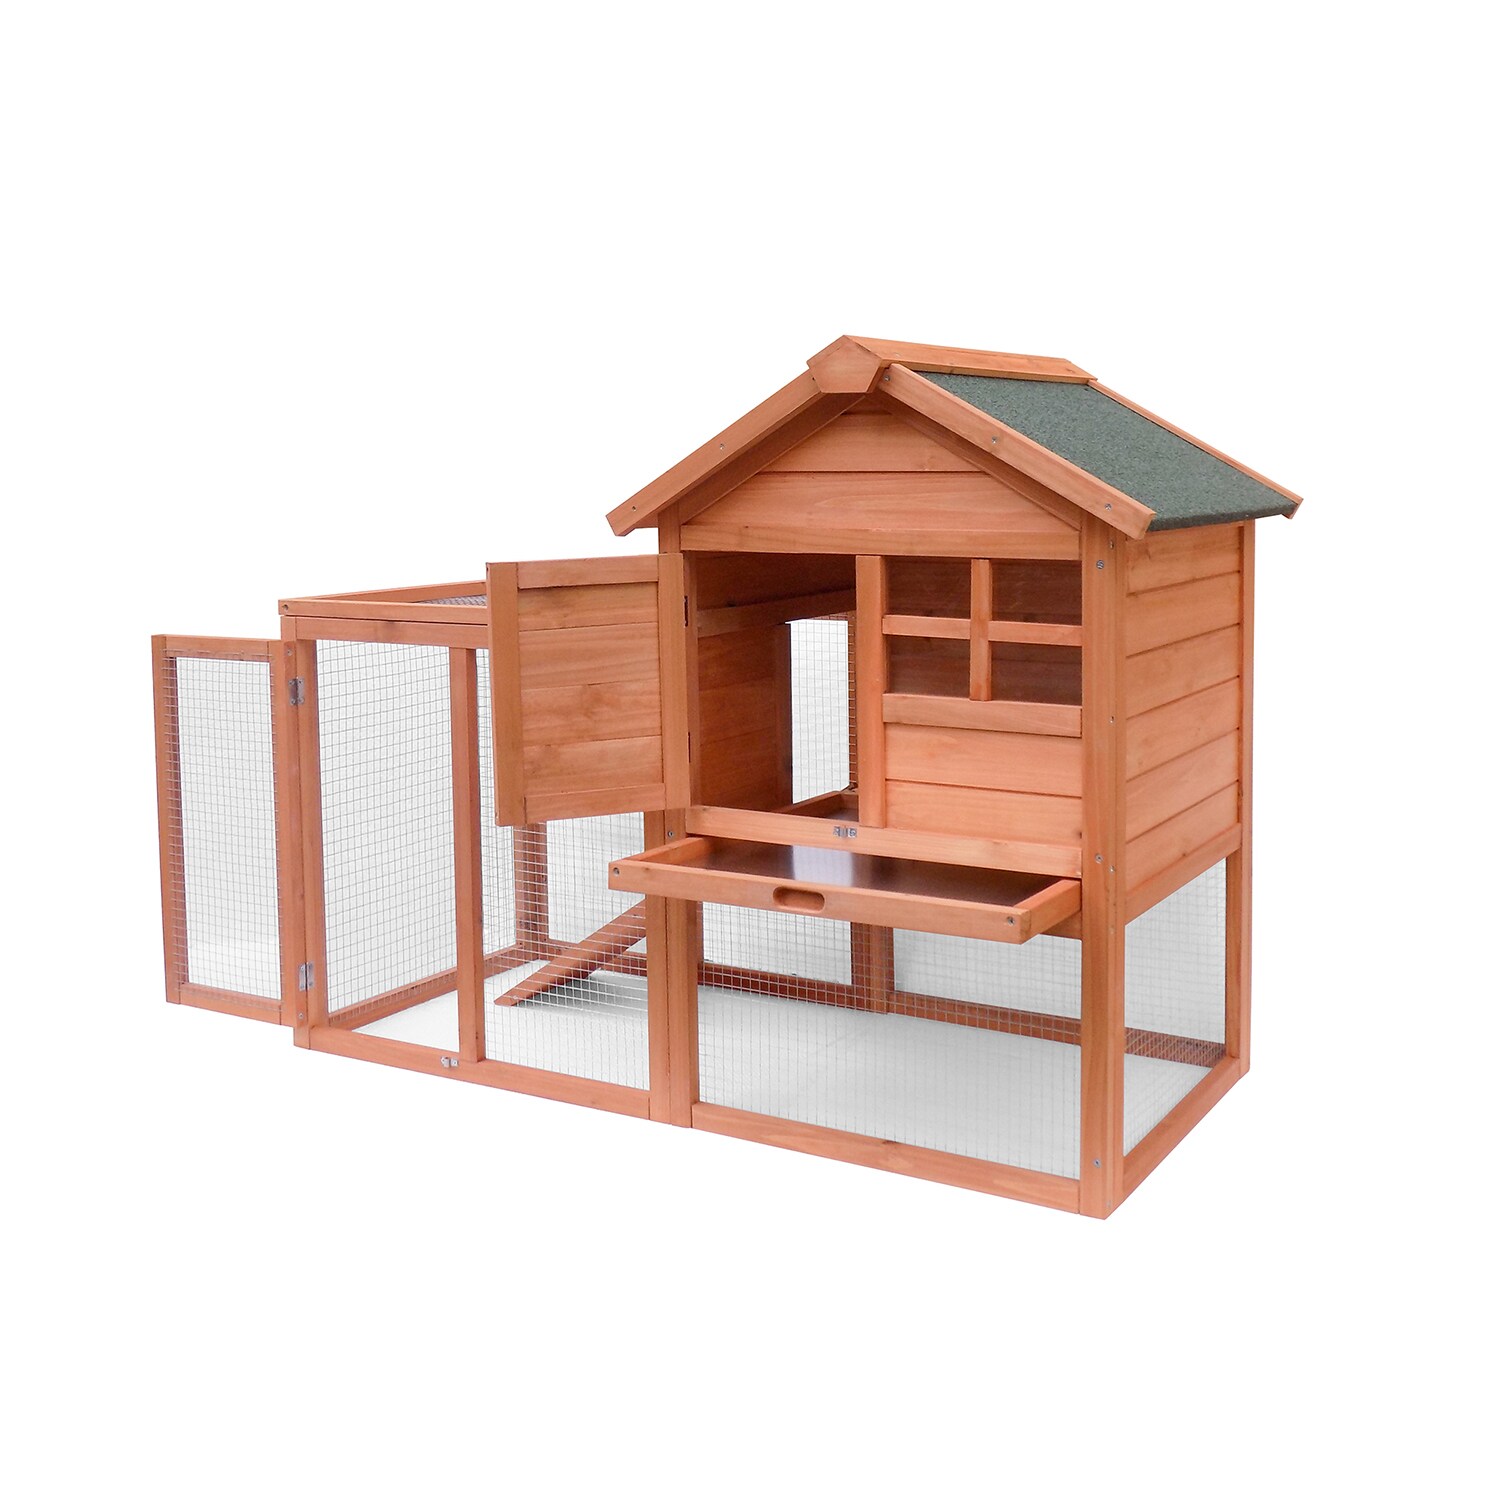 Merax Rabbit Hutch Pet Bunny Cage Wood Small Animals House for Outdoor/Indoor Use Auburn and White 